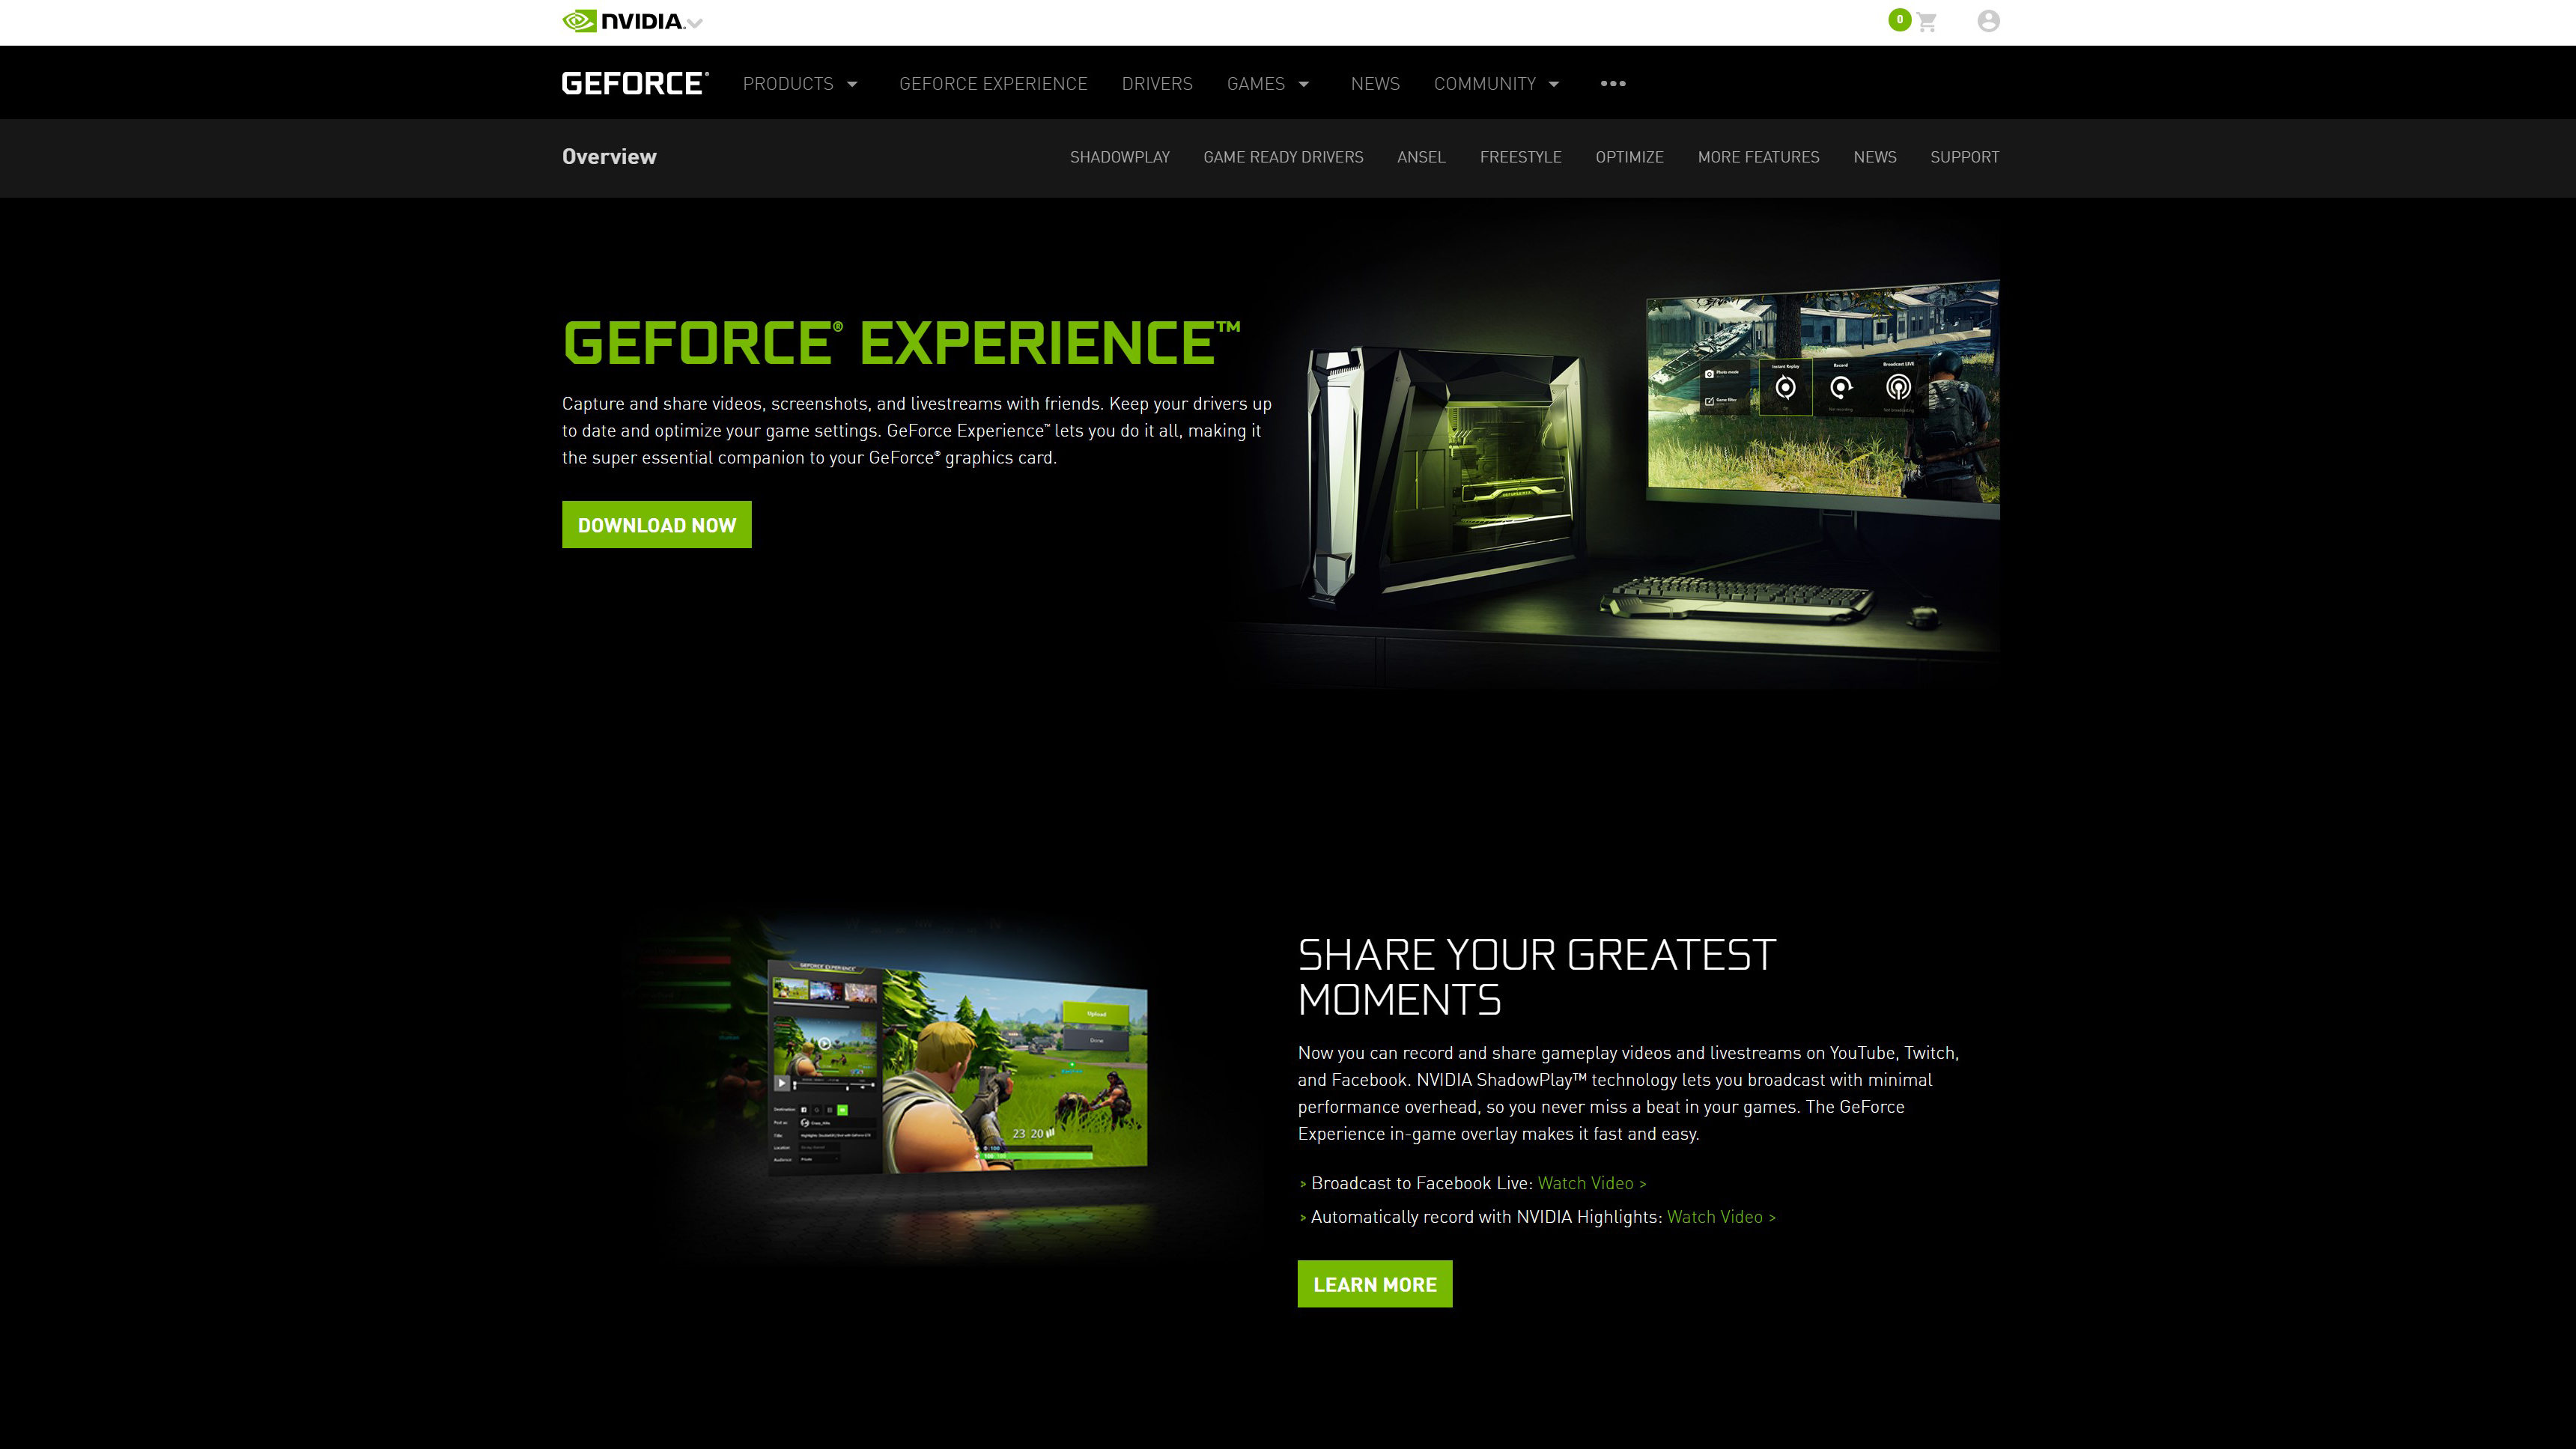 geforce experience record gameplay